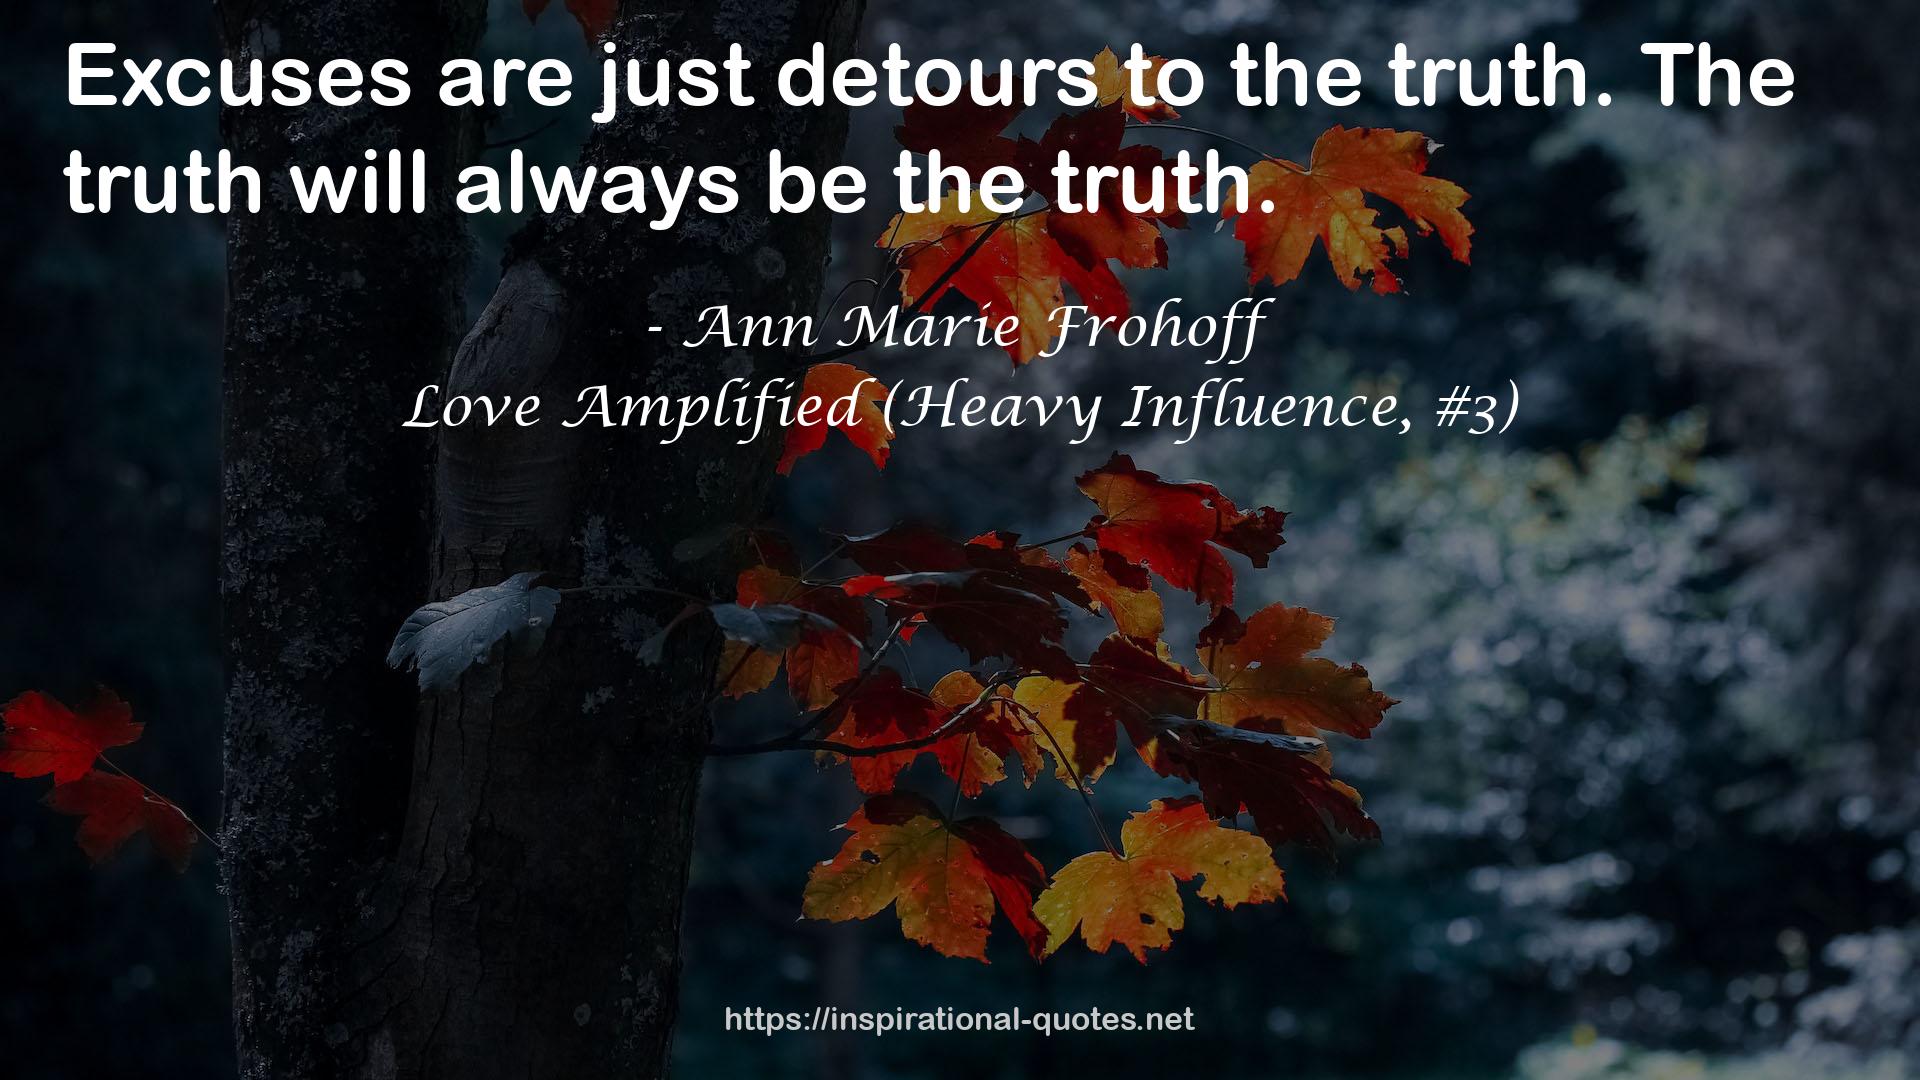 Love Amplified (Heavy Influence, #3) QUOTES